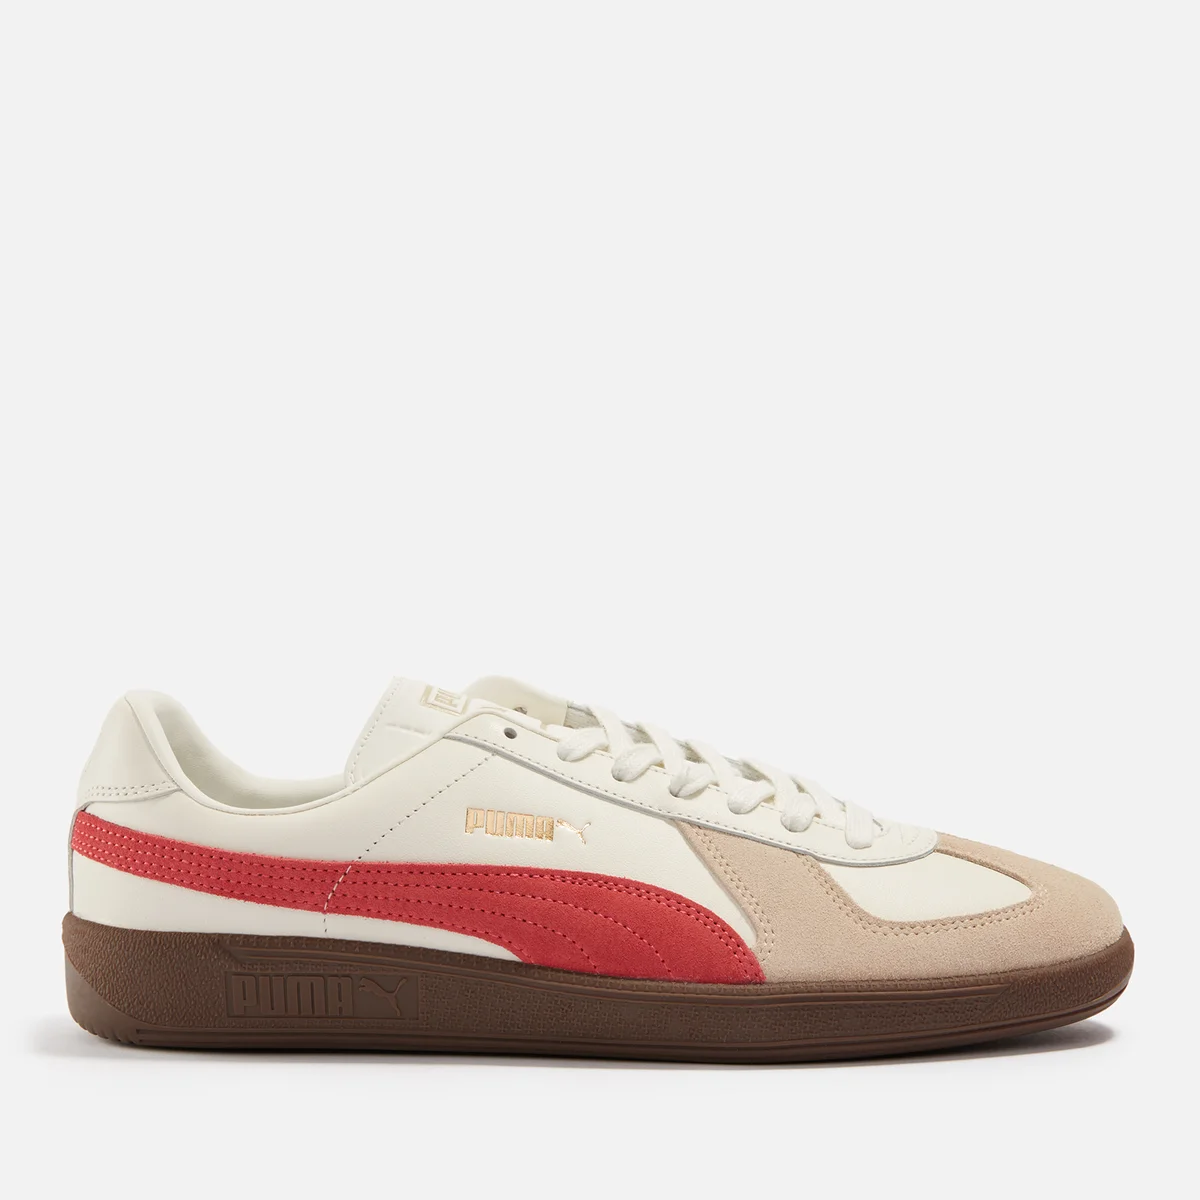 Puma Men's Army Leather and Suede Trainers Image 1